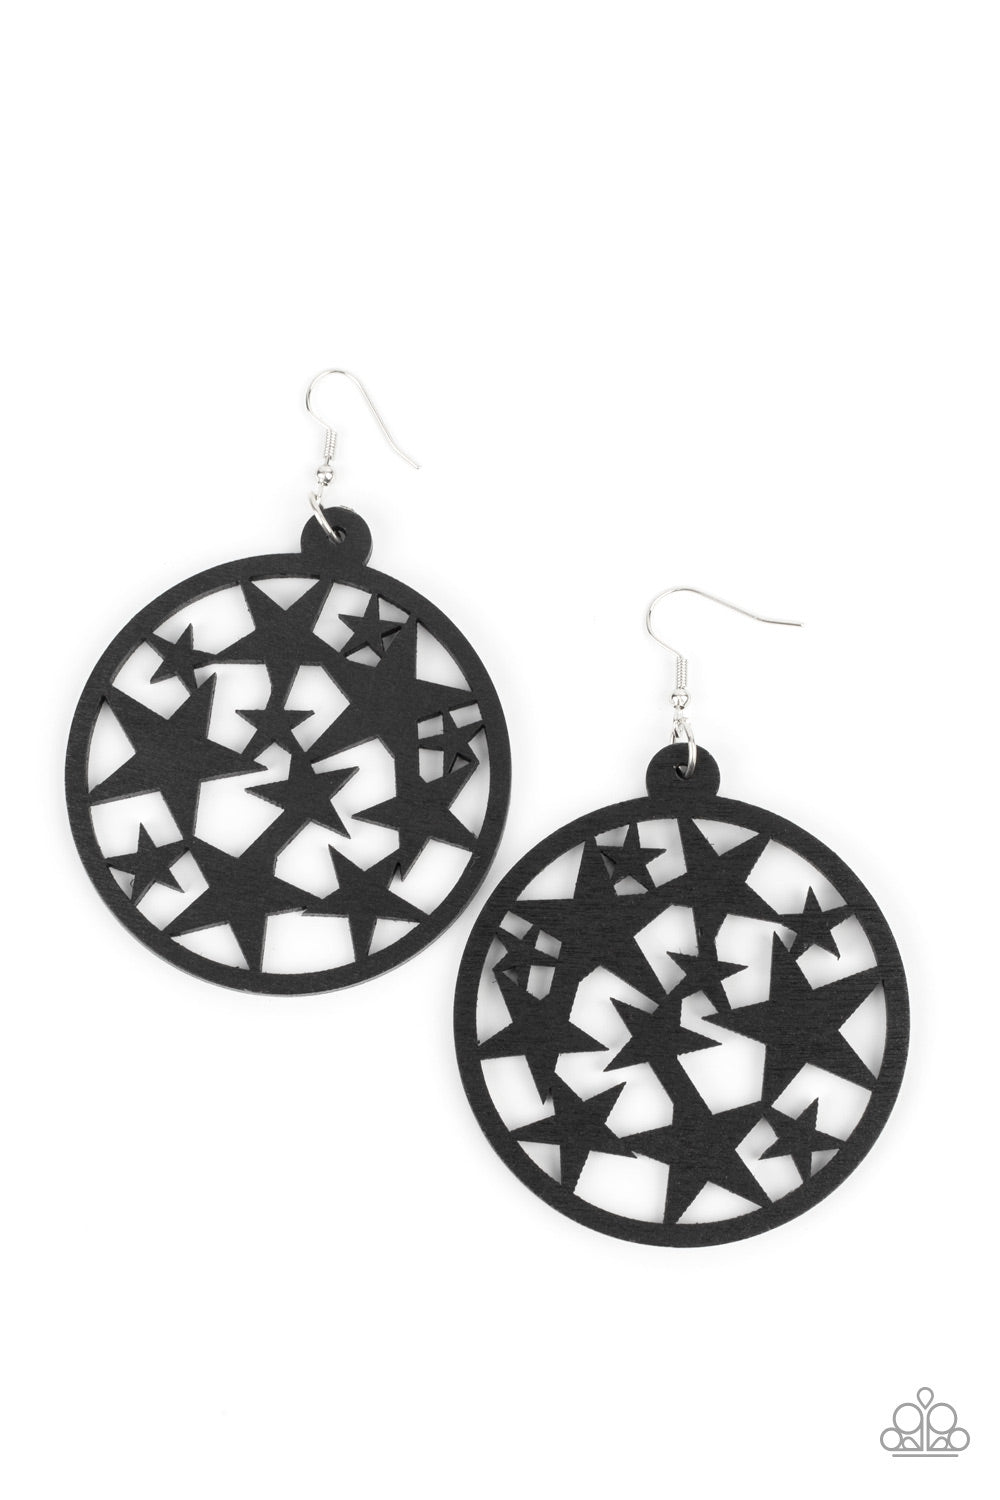 Cosmic Paradise Black Earring - Paparazzi Accessories  An oversized round black wooden frame is filled with a cosmos of cut-out black stars creating a whimsical statement. Earring attaches to a standard fishhook fitting.  Sold as one pair of earrings.